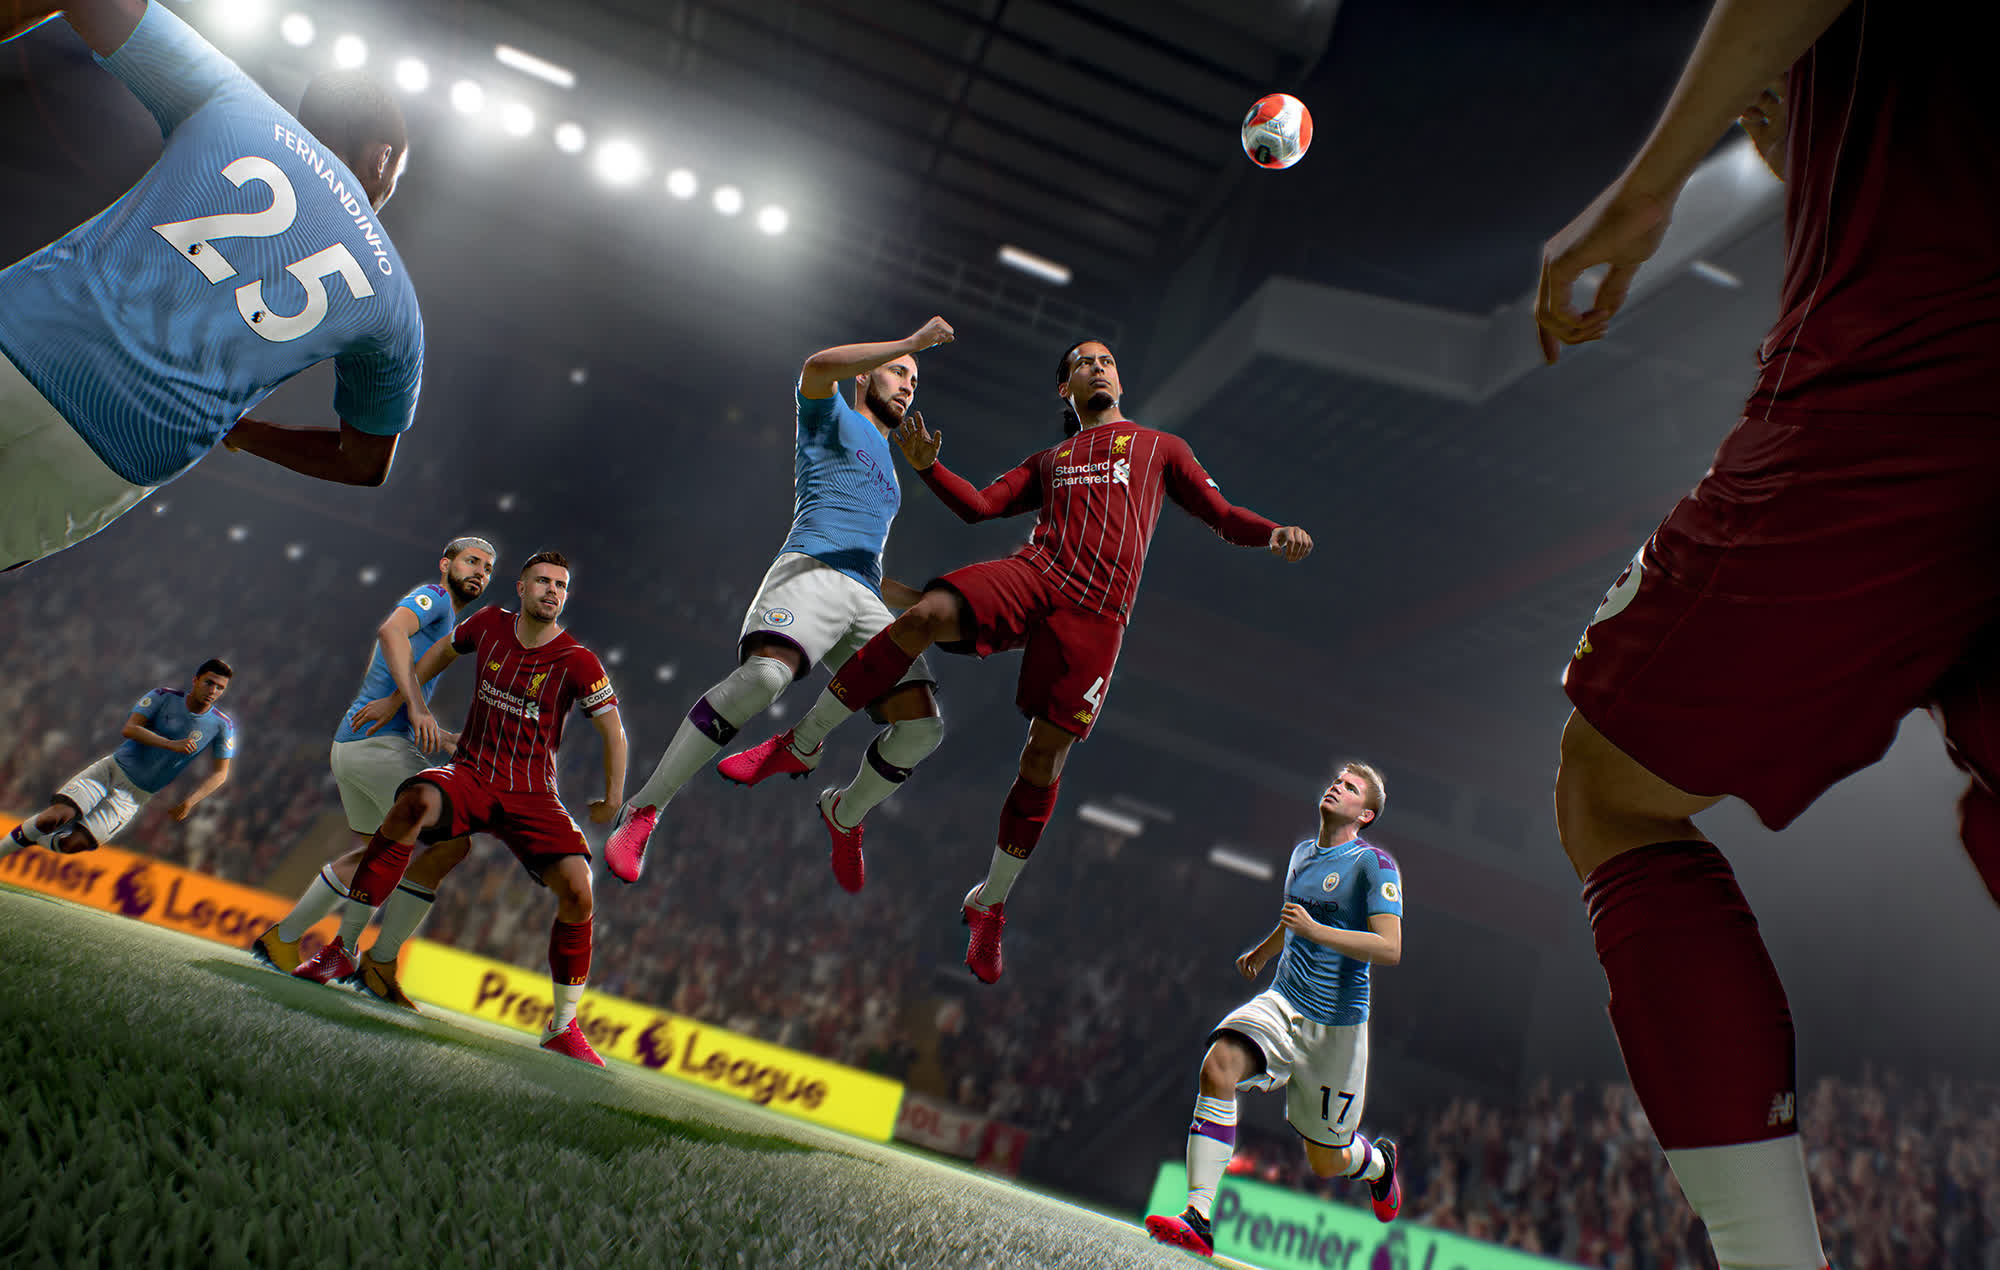 FIFA Soccer (Game): The world governing body of football, The games market. 2000x1270 HD Wallpaper.